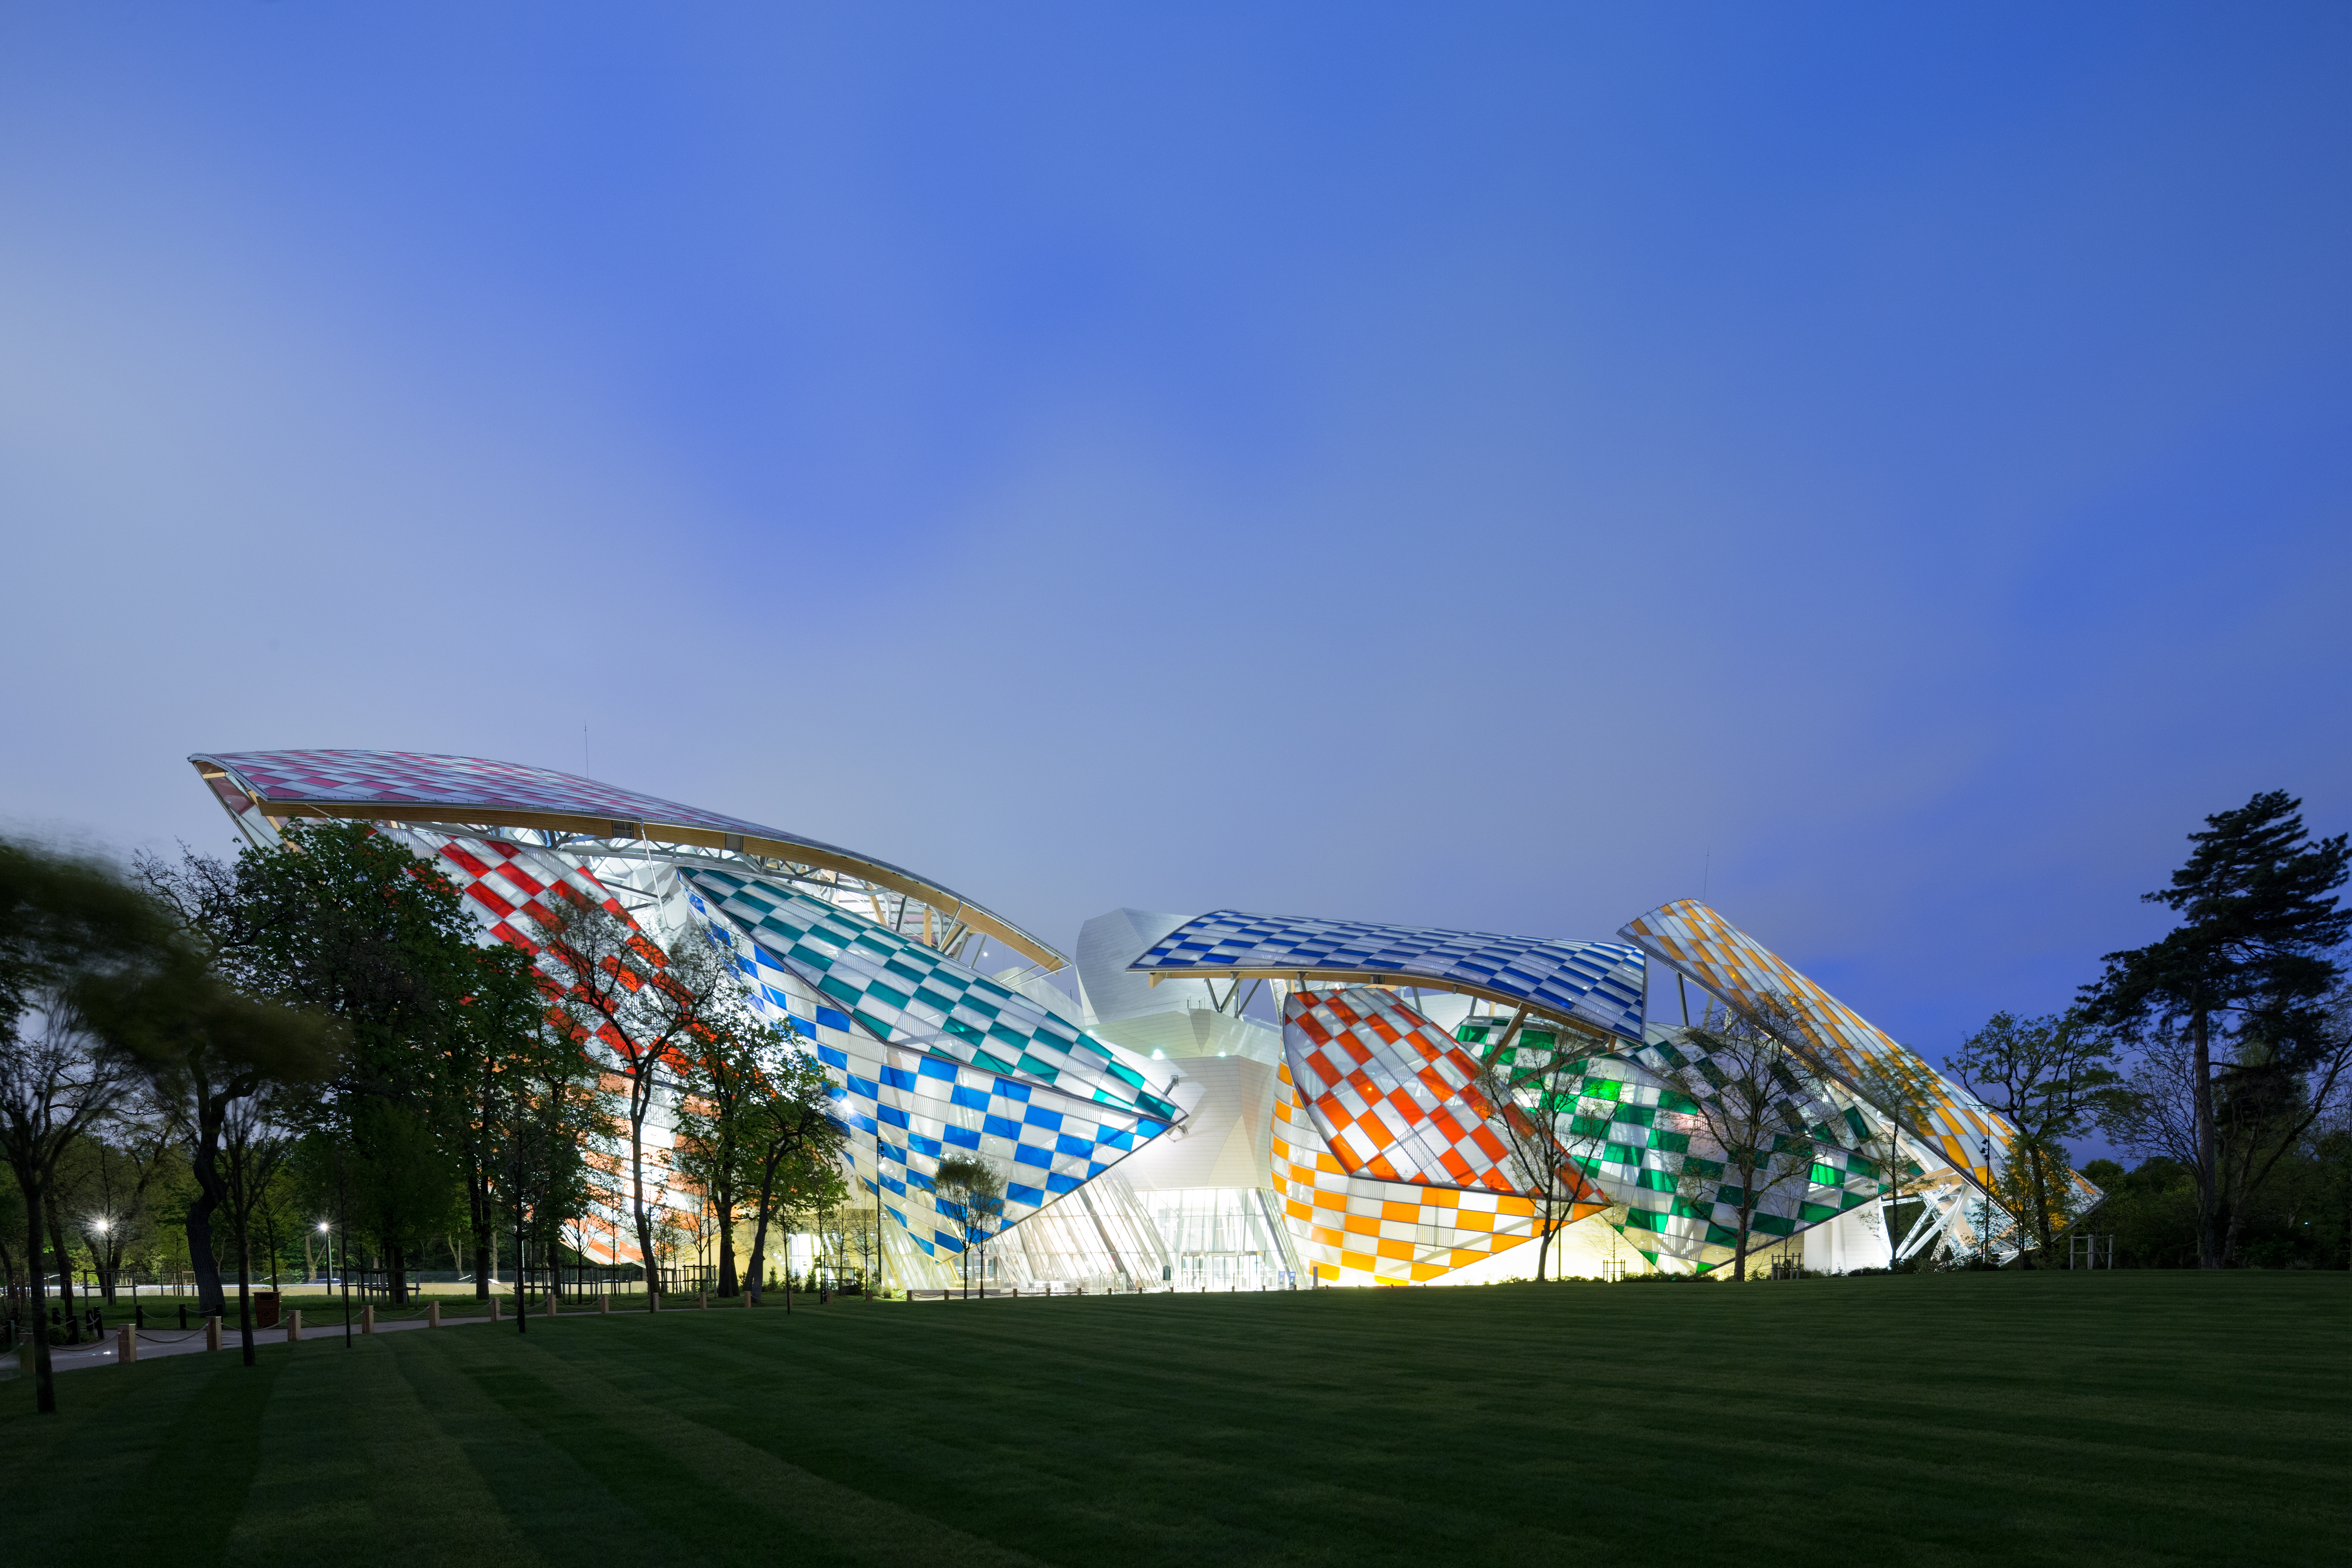 The Observatory of Light at the Fondation Louis Vuitton - www.semadata.org